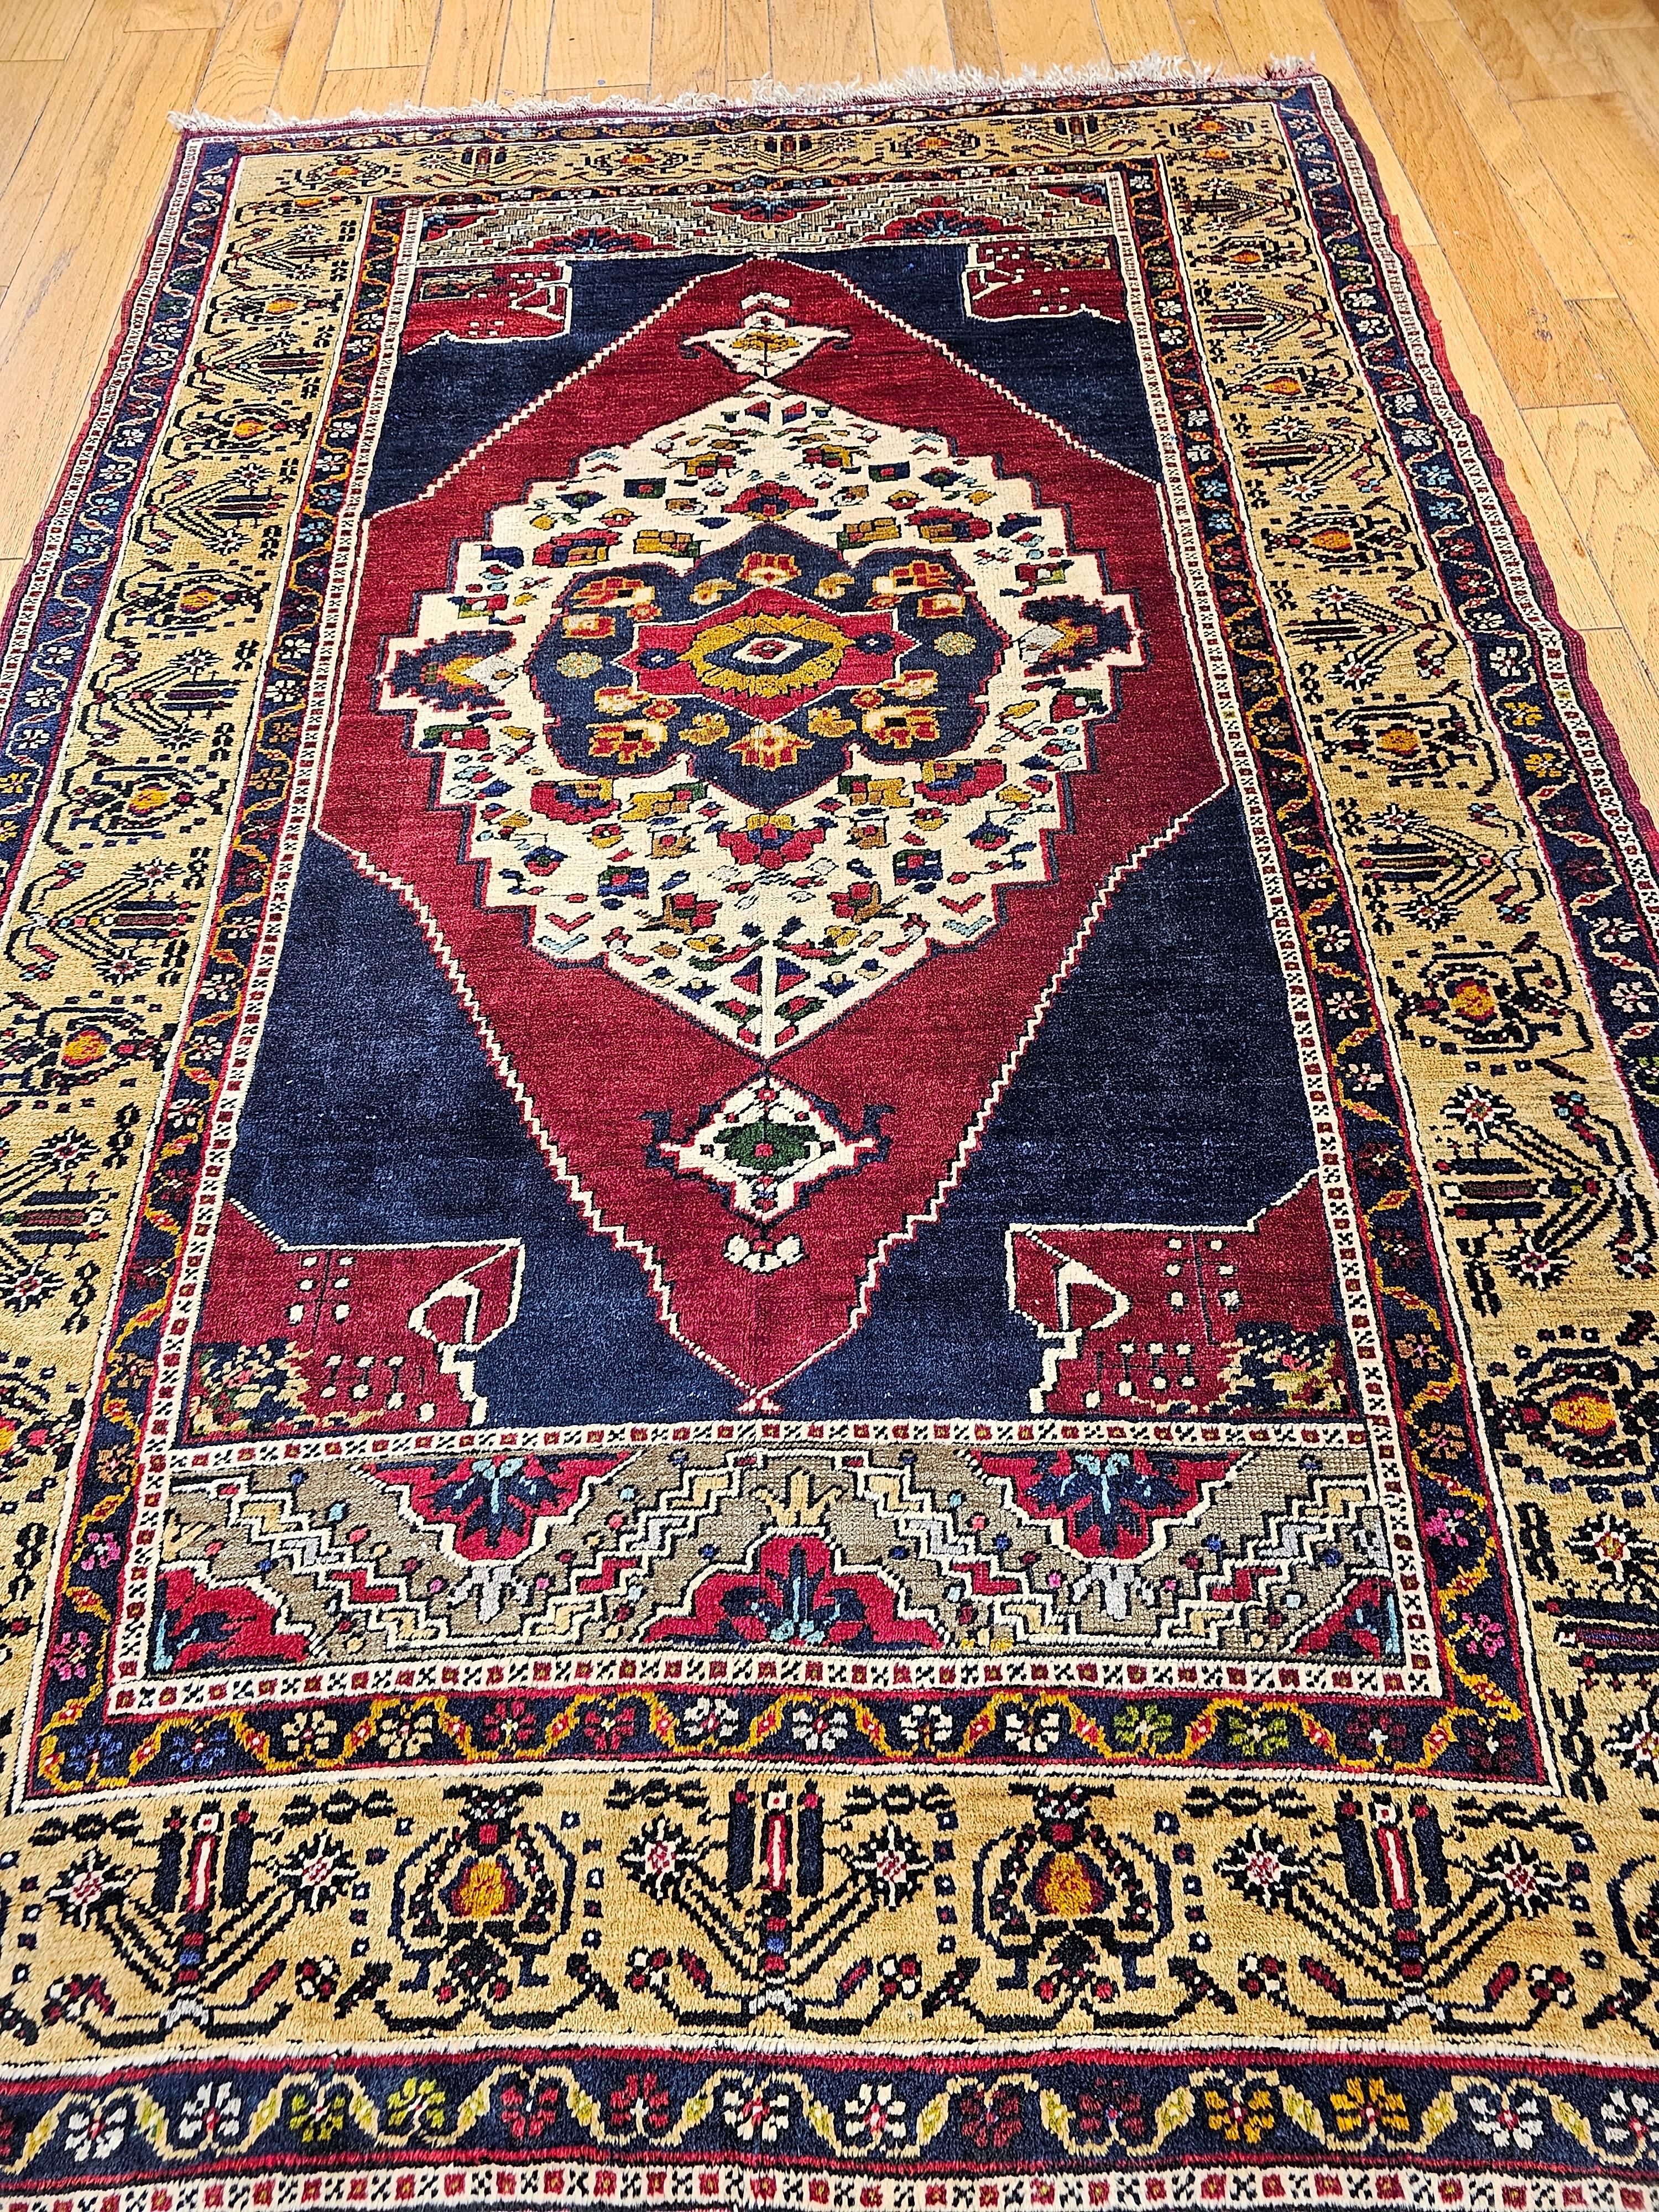 A beautiful Turkish Oushak hand-knotted Anatolian area rug from the 2nd quarter of the 1900s.  The rug has dark blue and red background that contain the inner and outer medallions.  The special feature of this rug is its beautifully designed ivory